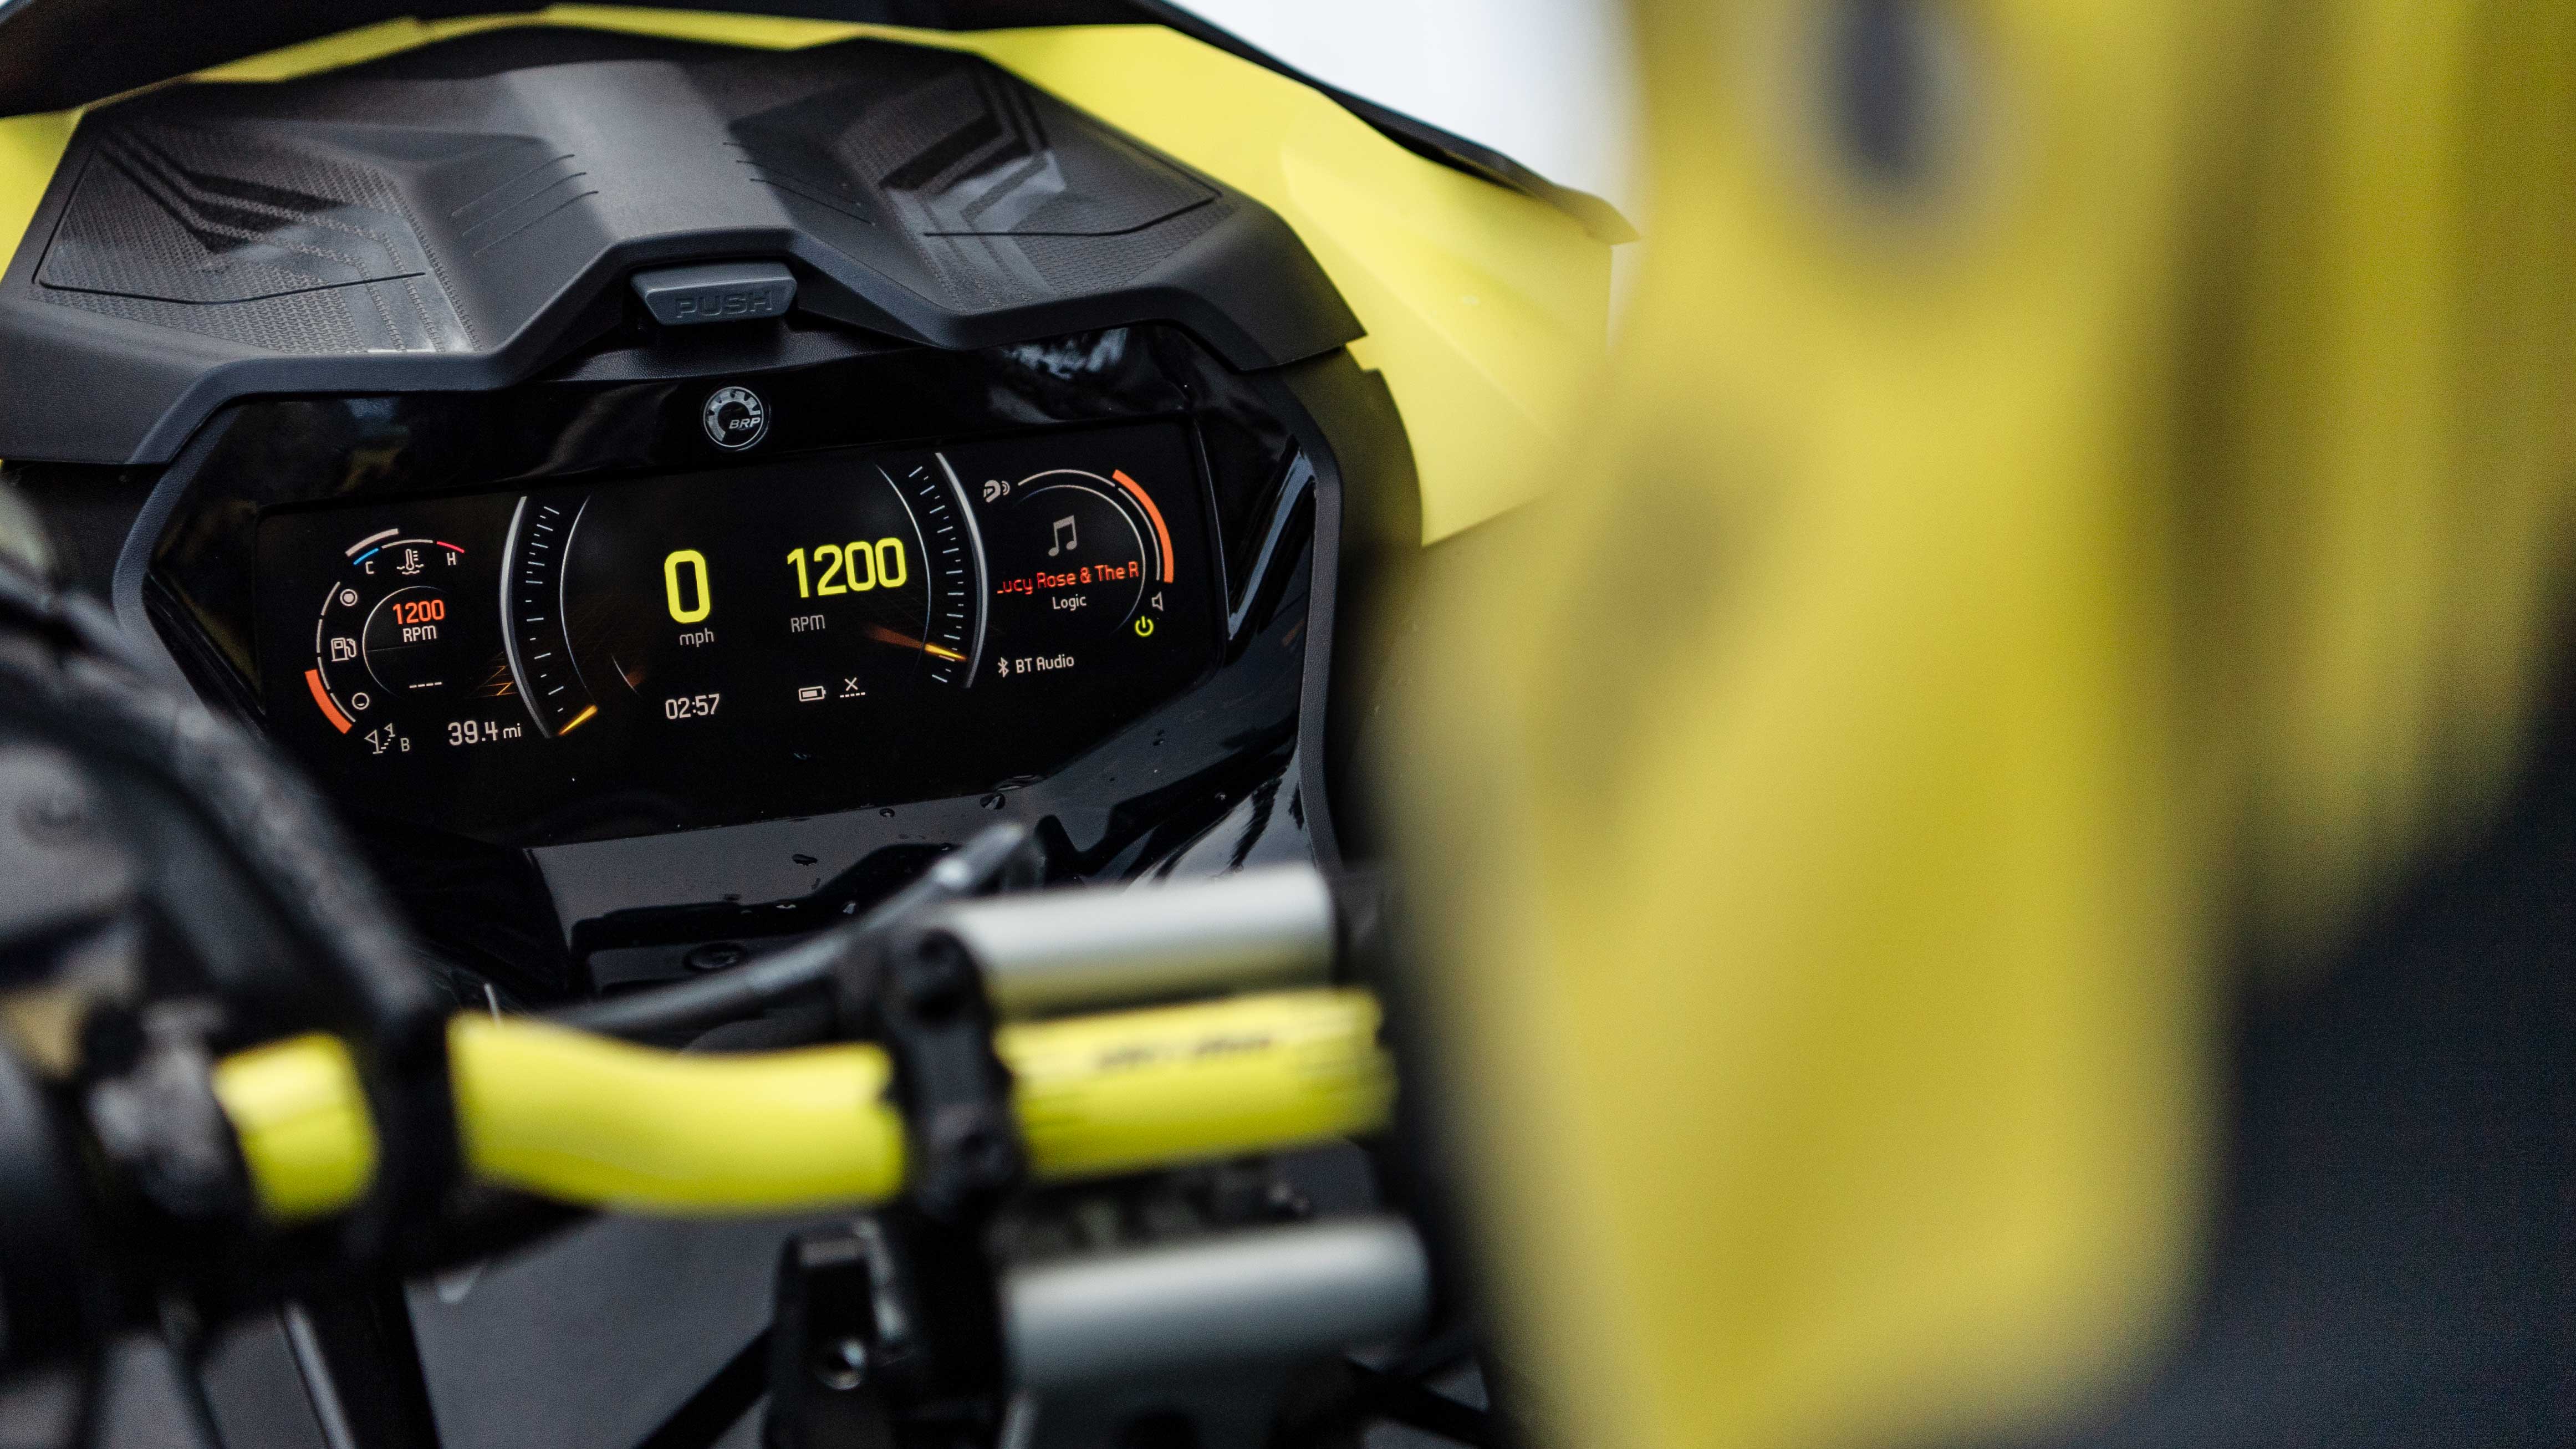 Ski-Doo full color gauge with BRP Connect compatibility